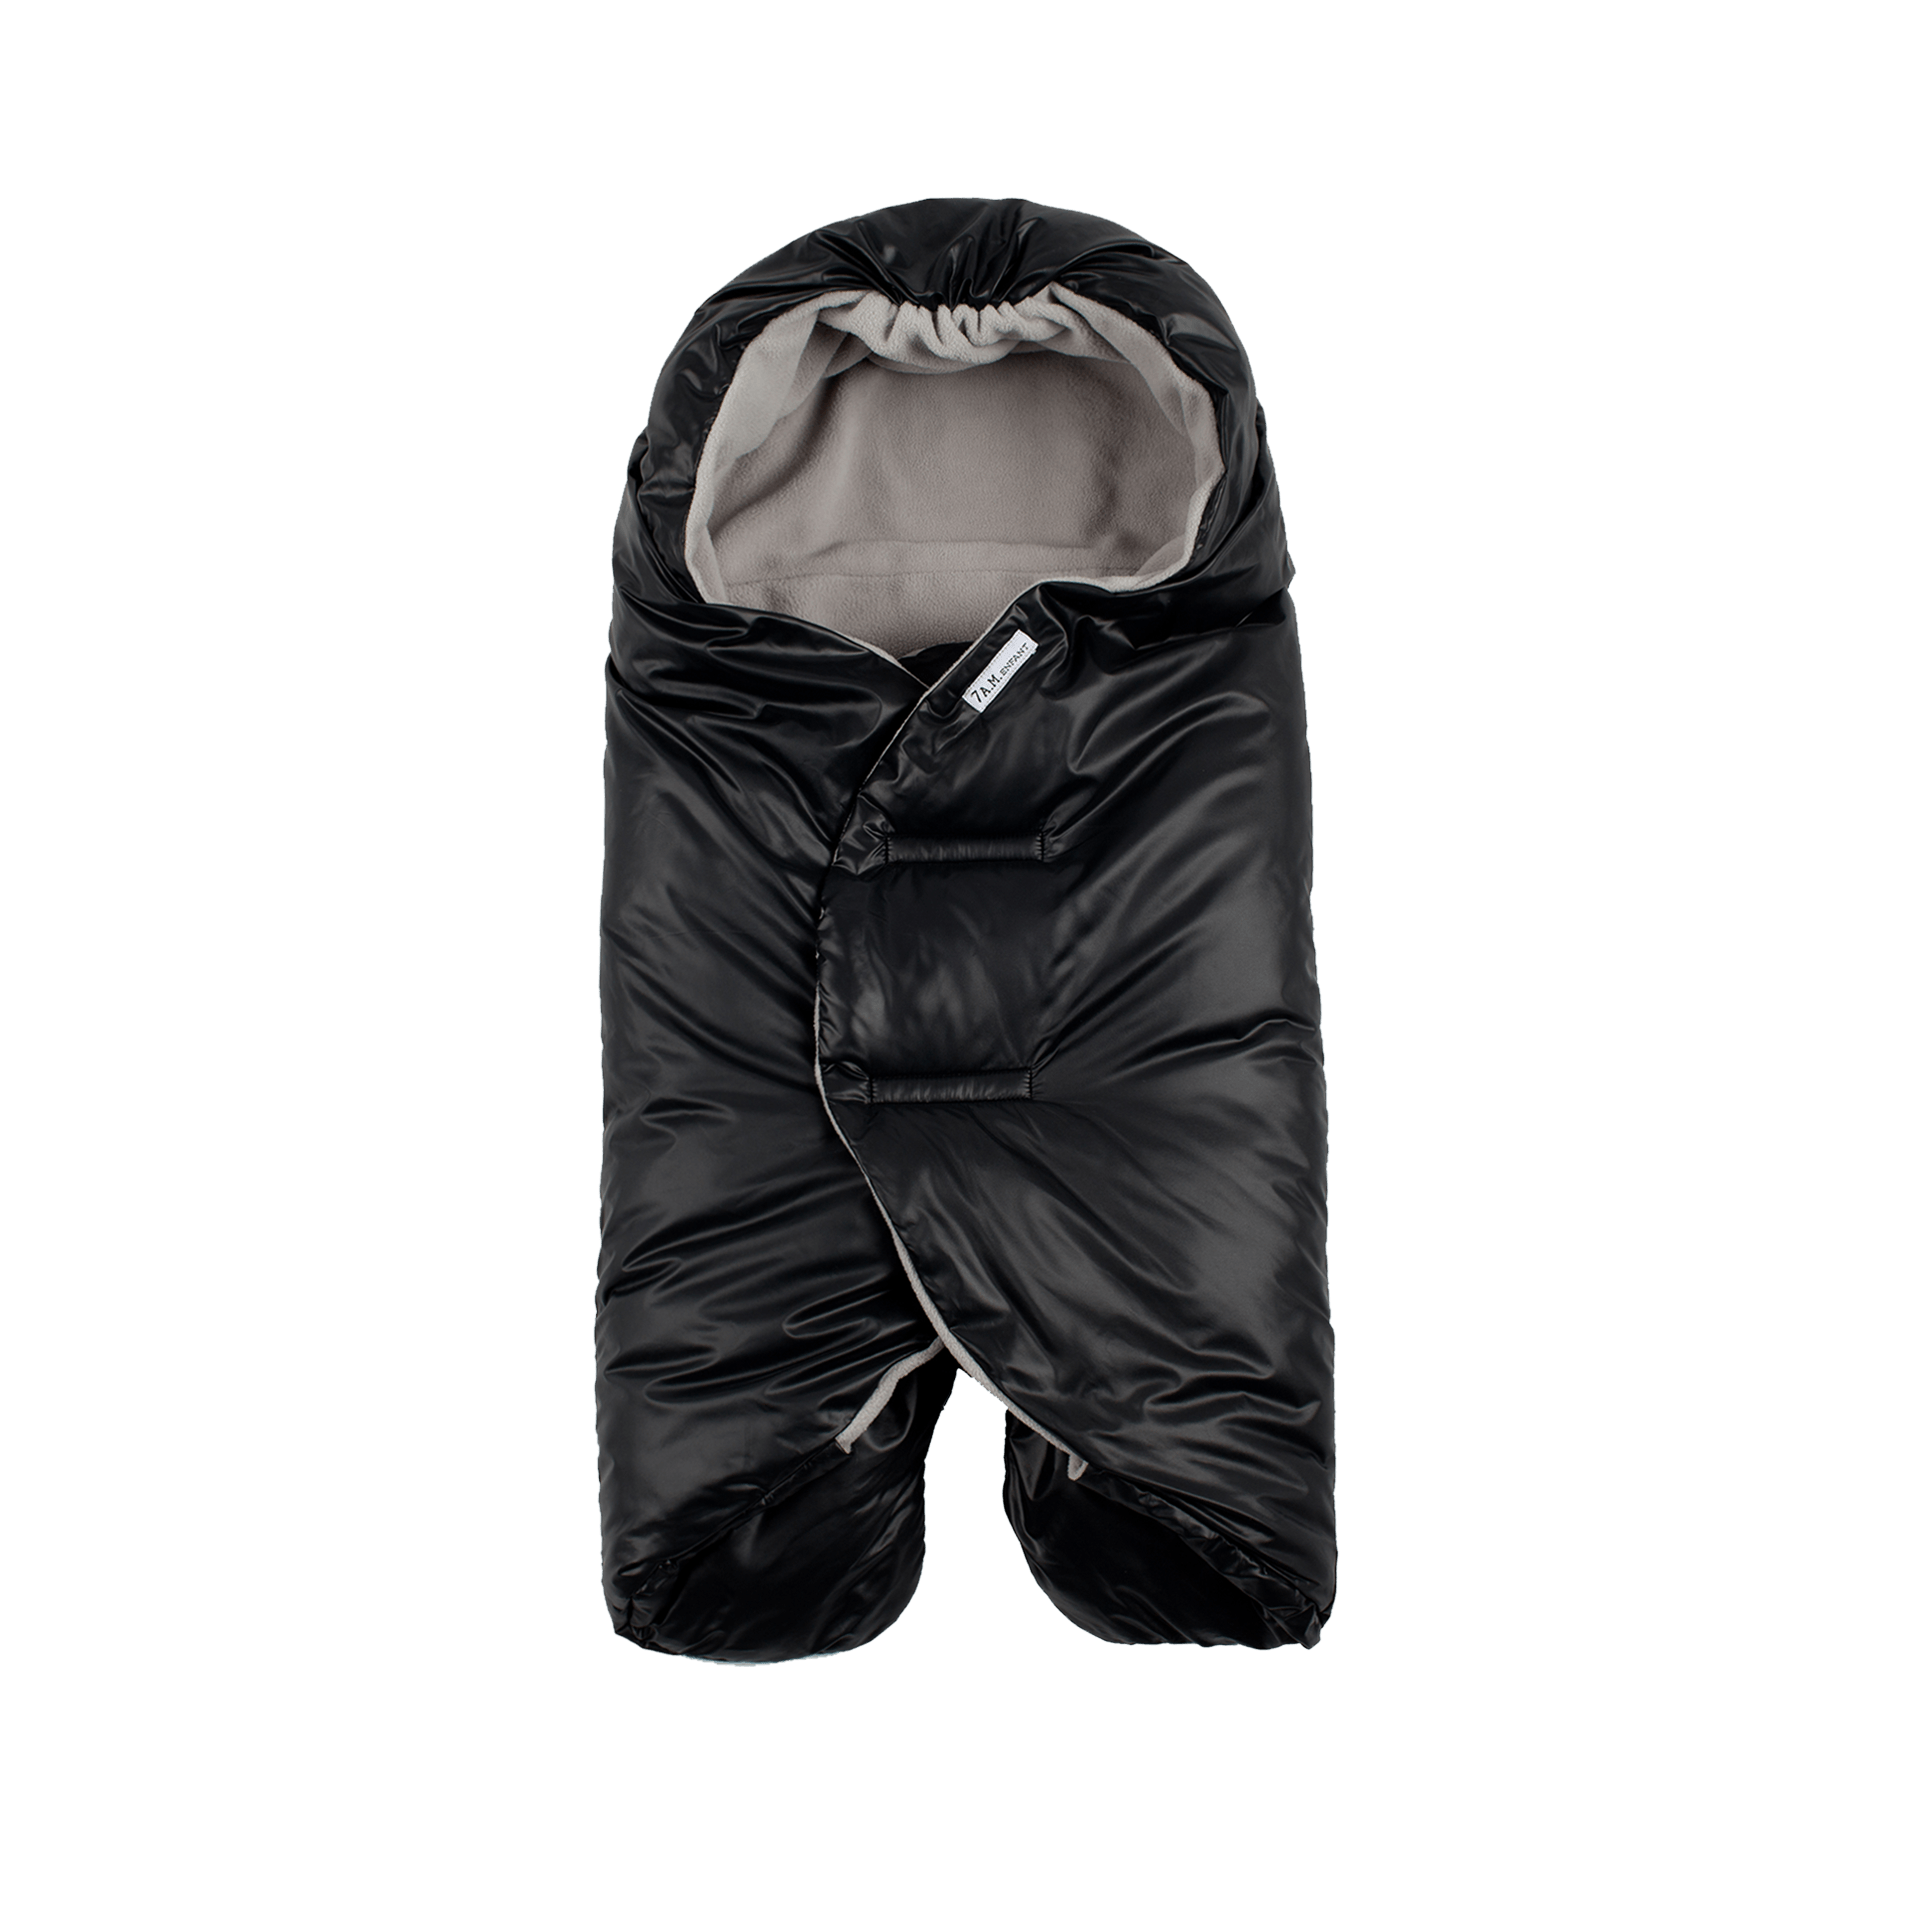 7 AM Enfant Nido Quilted Wrap, Black - ANB Baby -$50 - $75